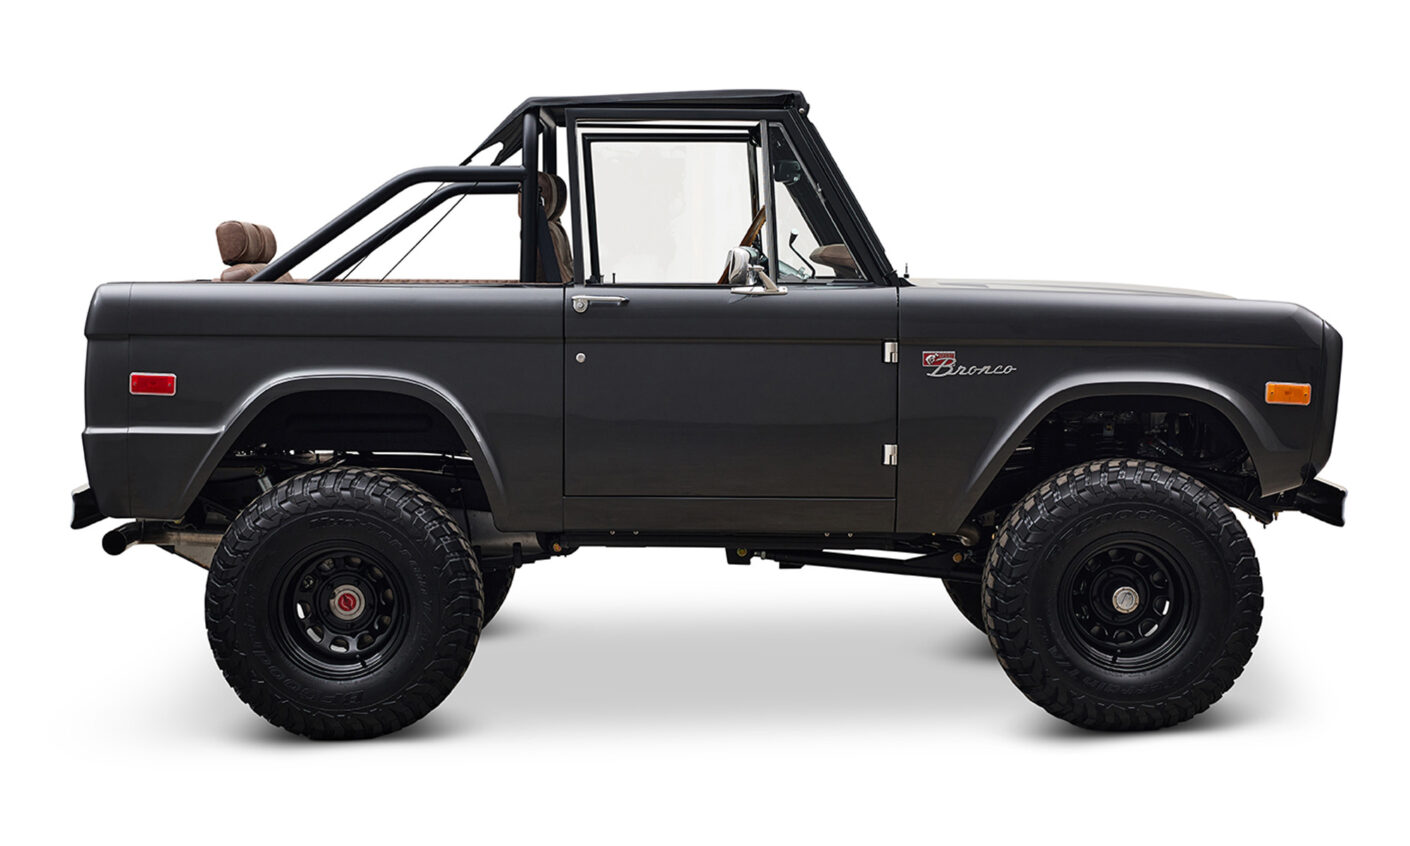 1969 For Bronco 302 Series in Magnetic Gray with Custom Cigar Leather Interior and Bikini Top